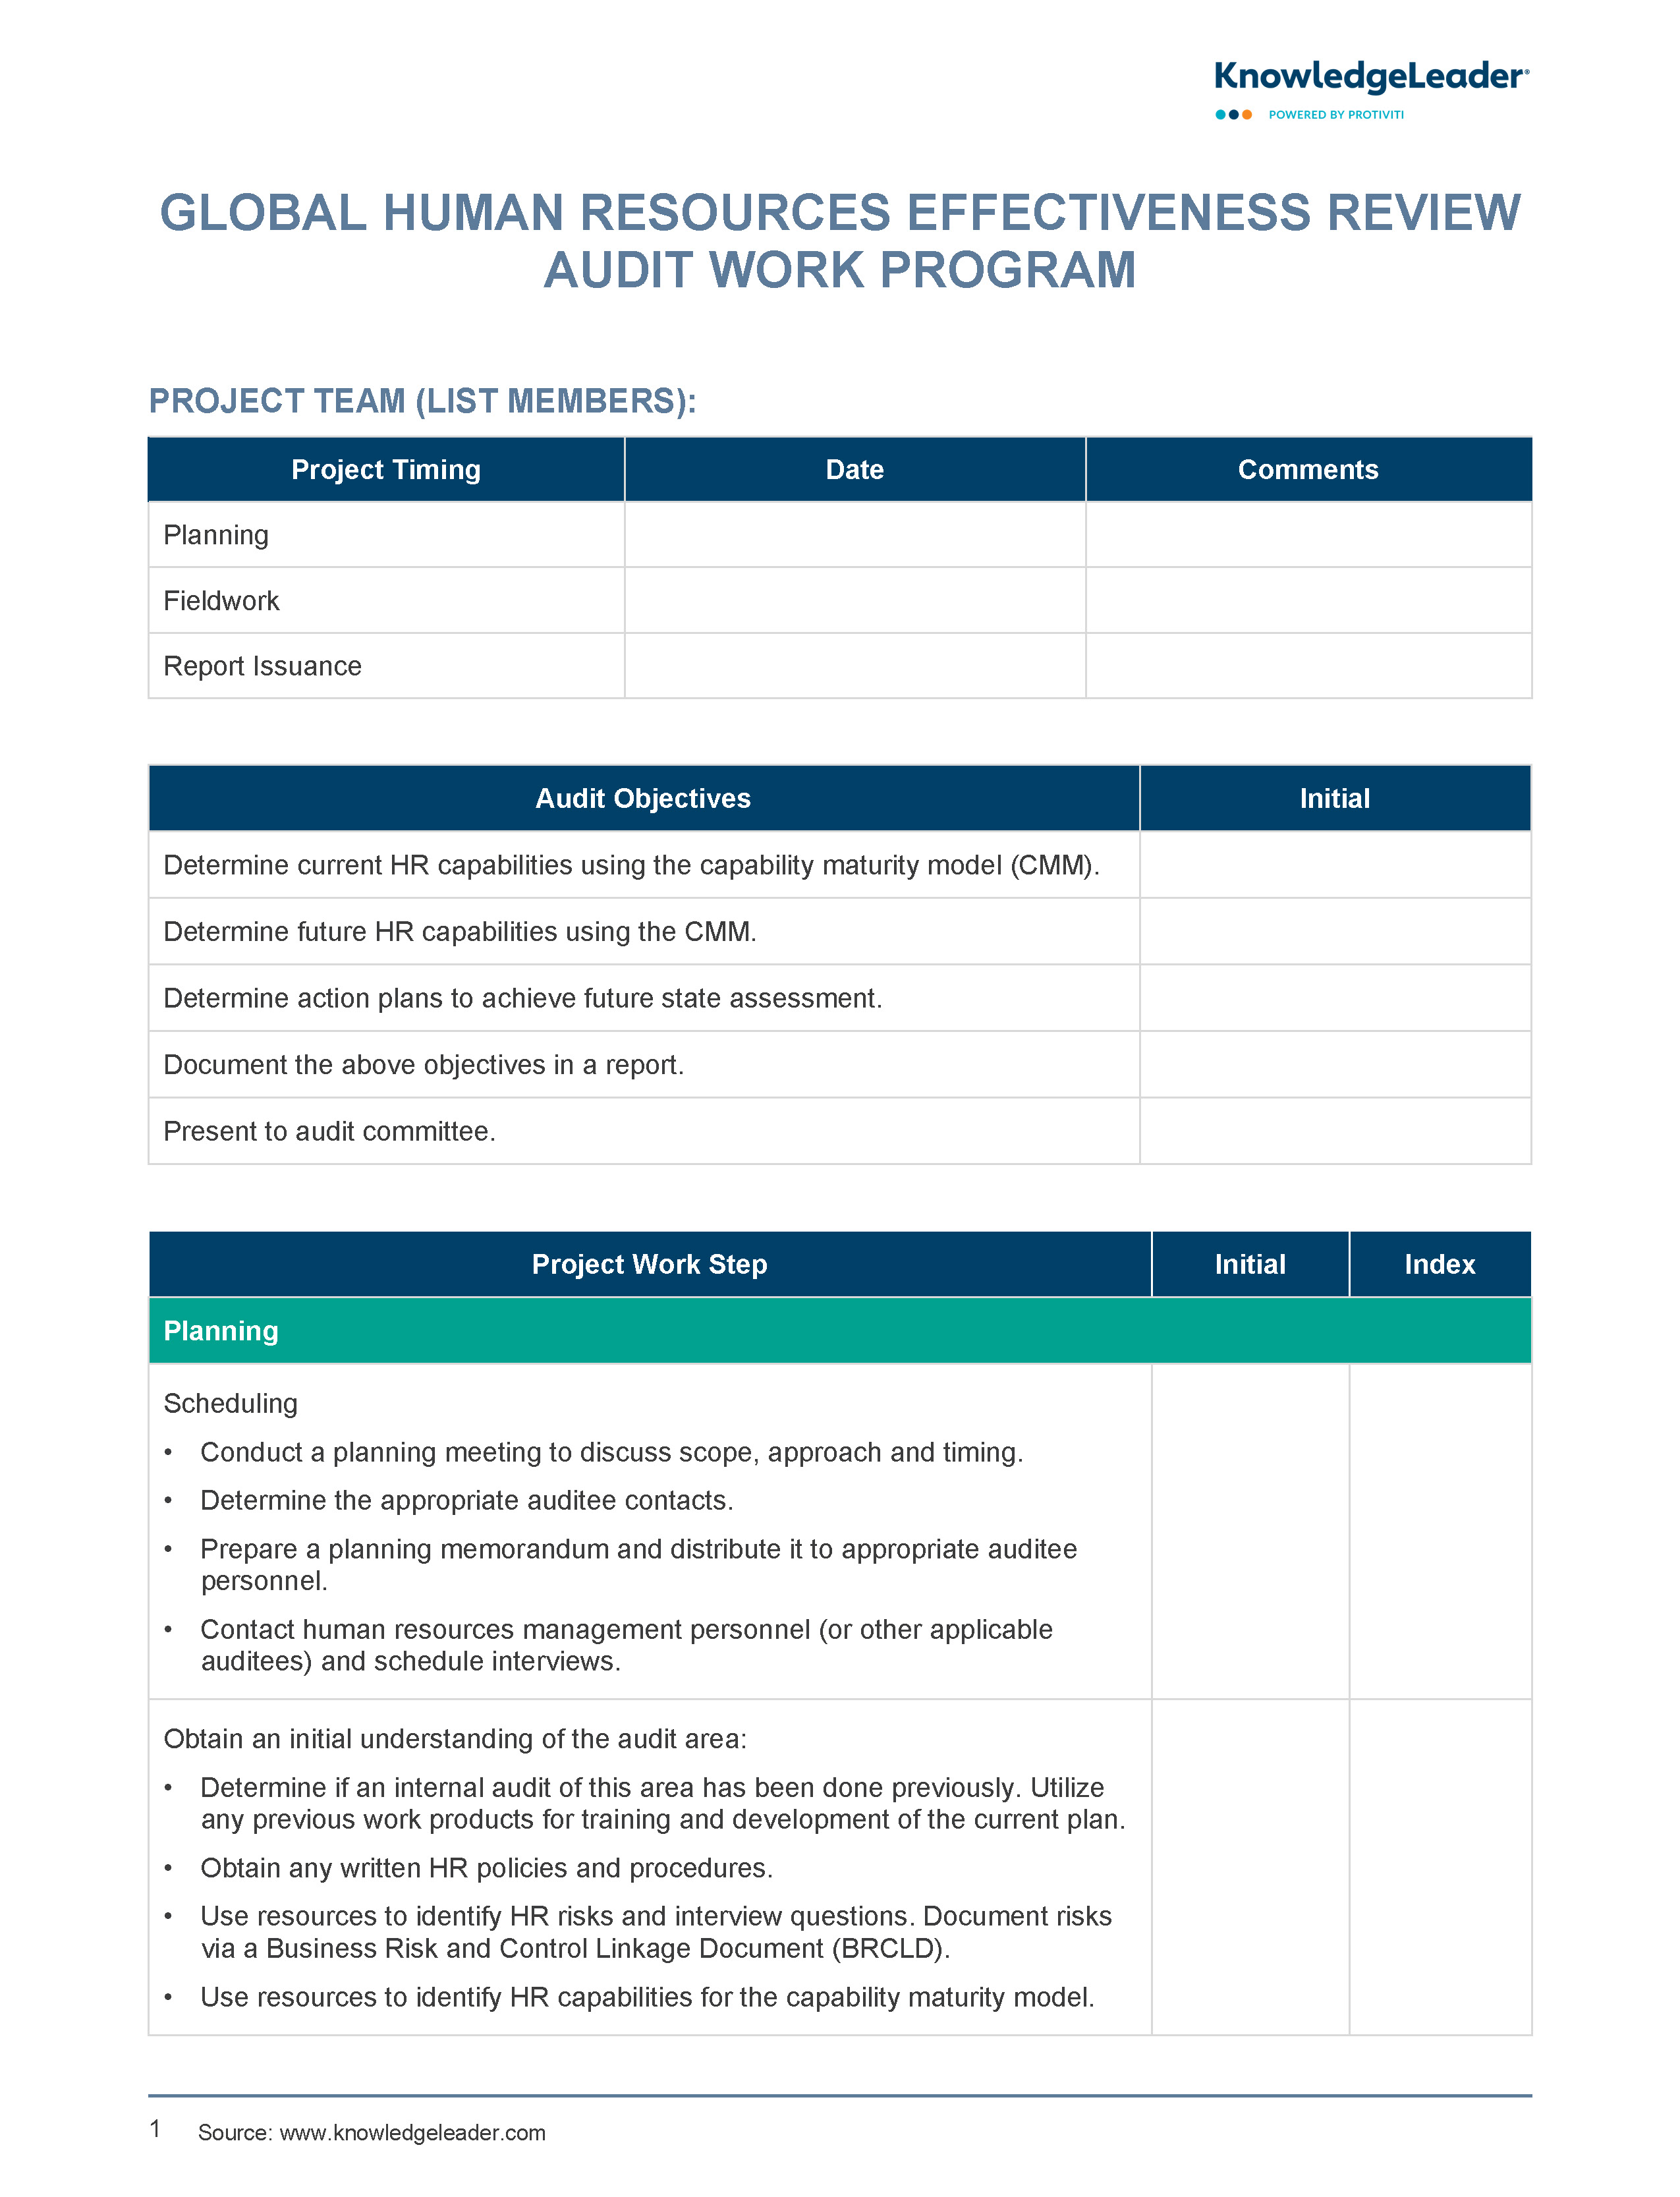 Screenshot of the first page of Global Human Resources Effectiveness Review Audit Work Program